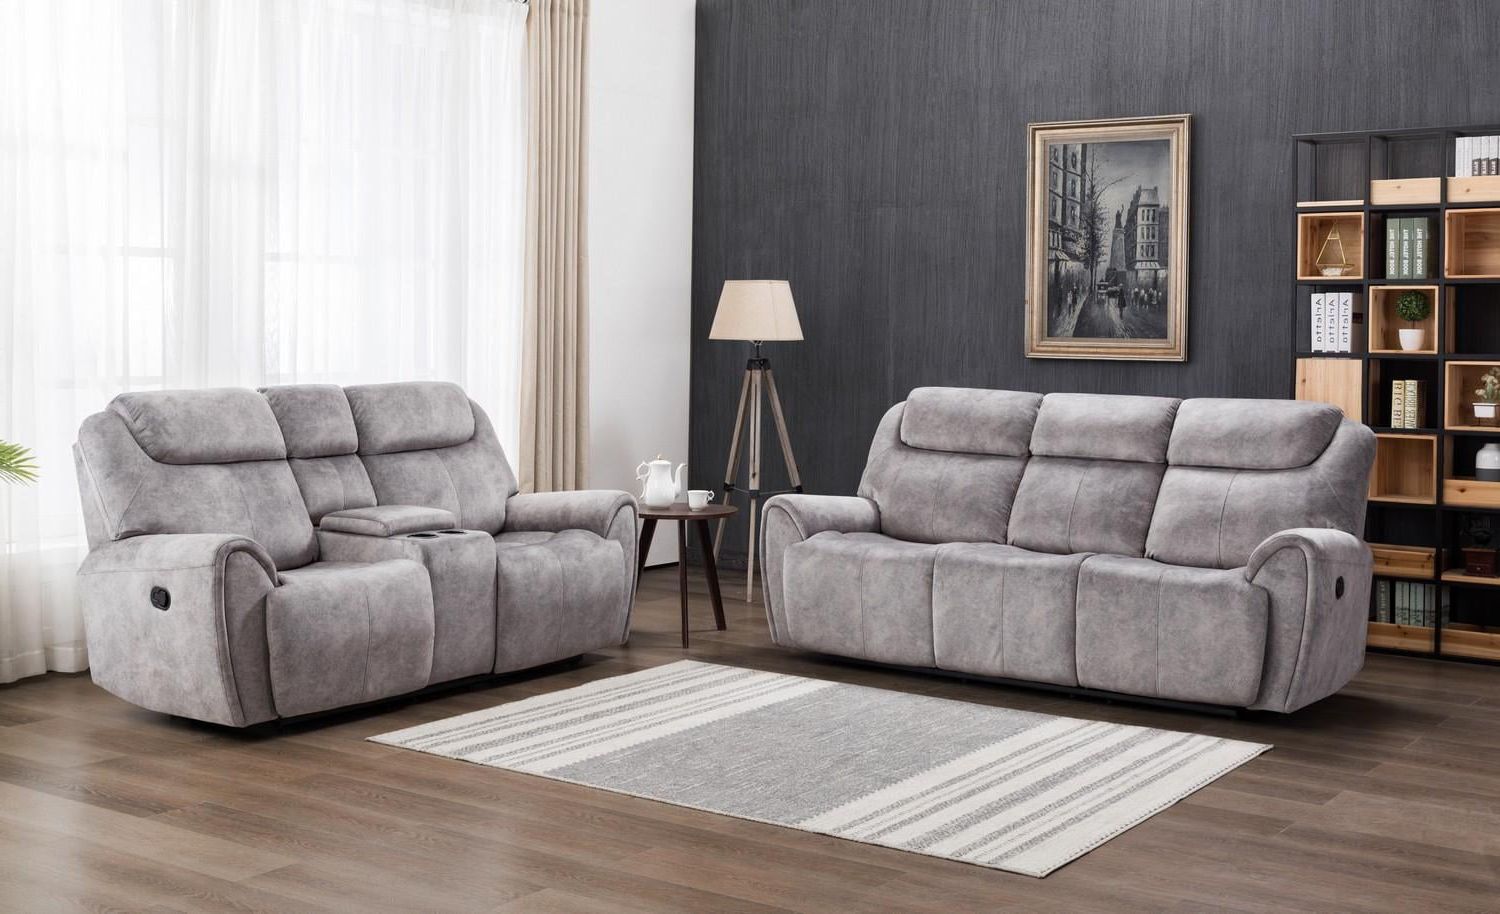 Gray Velvet Fabric Reclining Sofa & Loveseat Set Contemporary Global Intended For Modern Velvet Sofa Recliners With Storage (View 8 of 20)